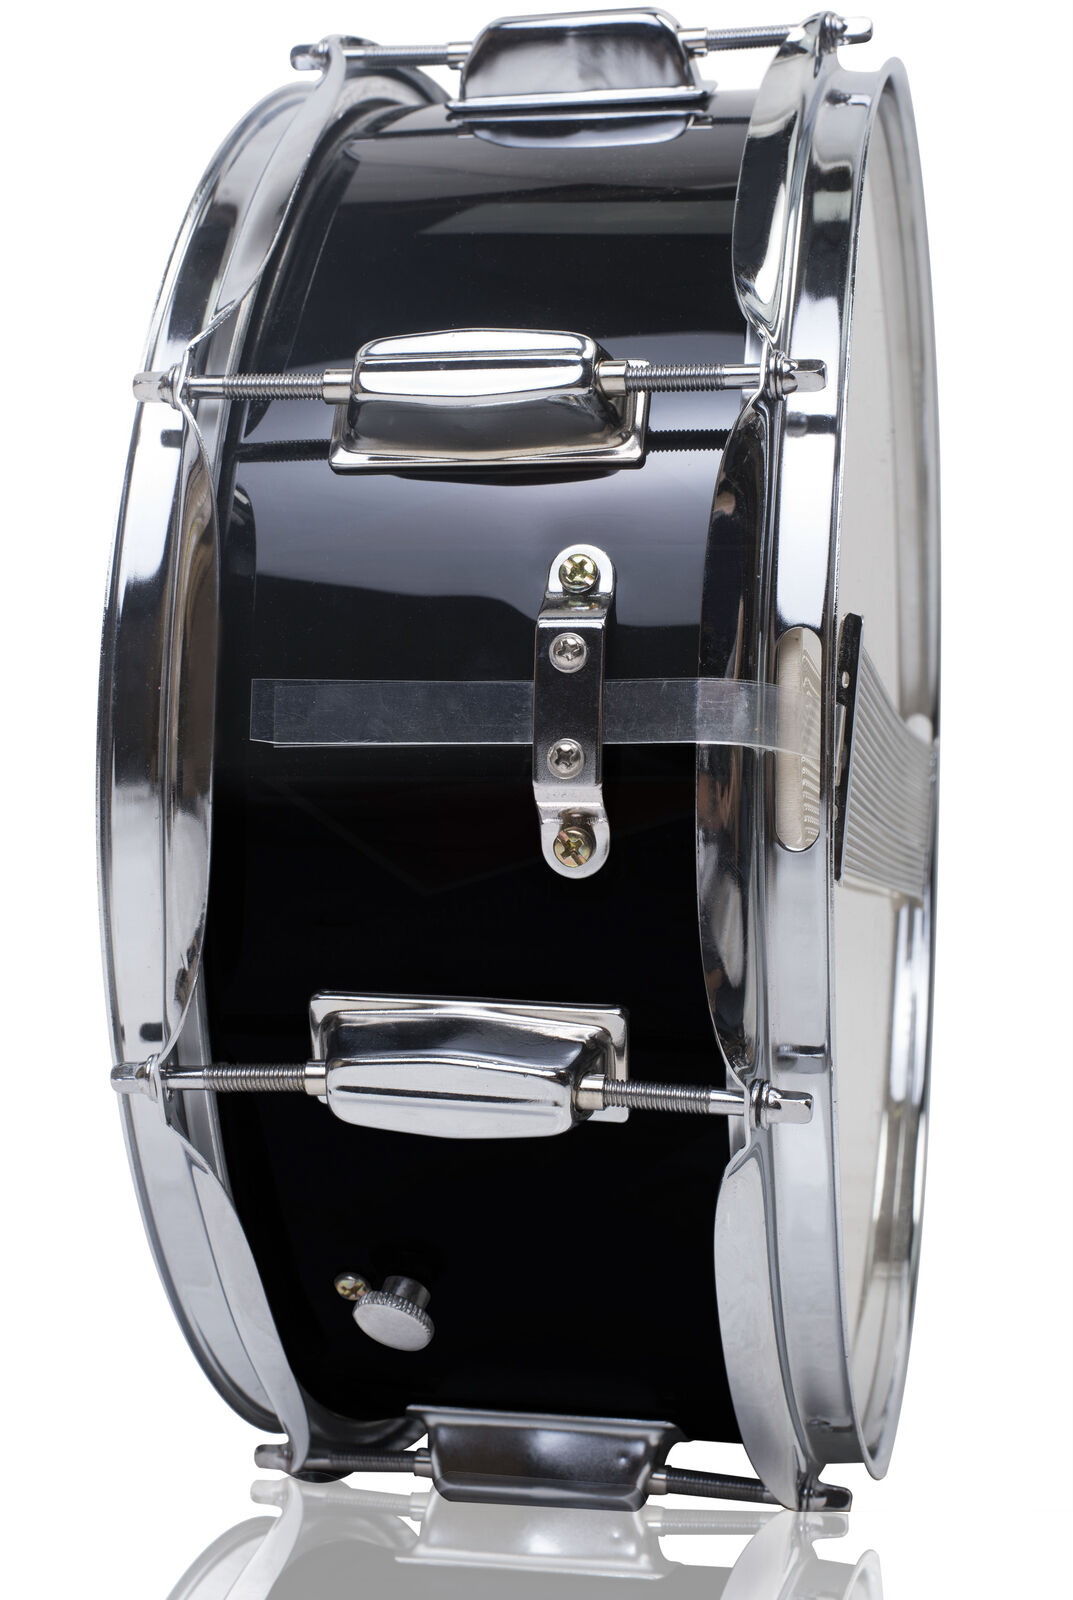 GRIFFIN Snare Drum – Black 14″x5.5 Poplar Wood Shell Acoustic Percussion Kit Set 6